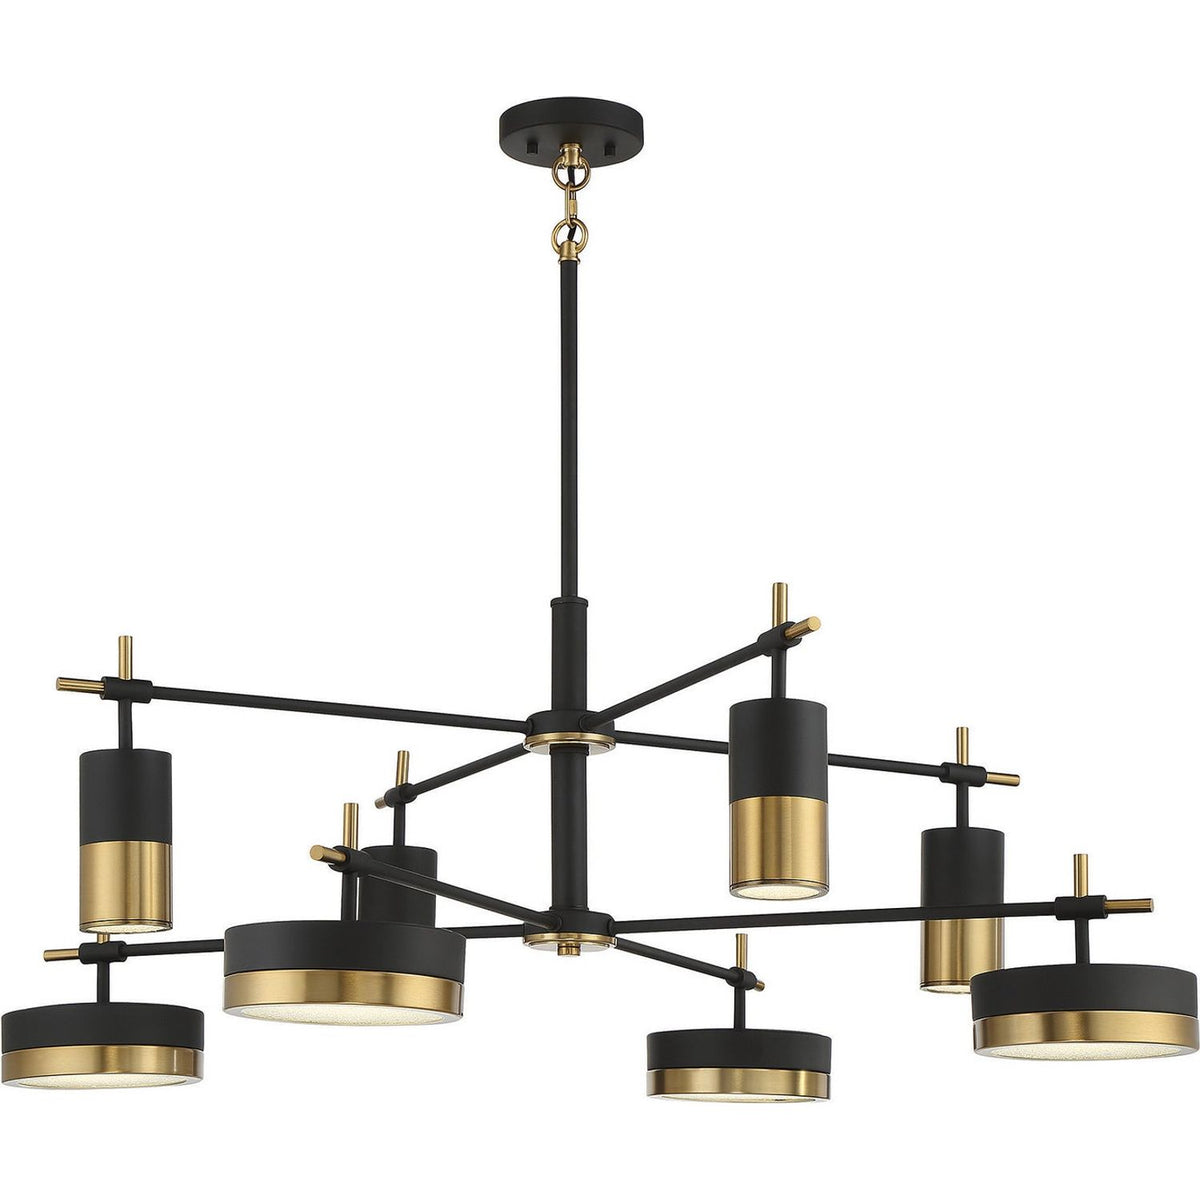 Savoy House - 1-1637-8-143 - LED Chandelier - Ashor - Matte Black with Warm Brass Accents